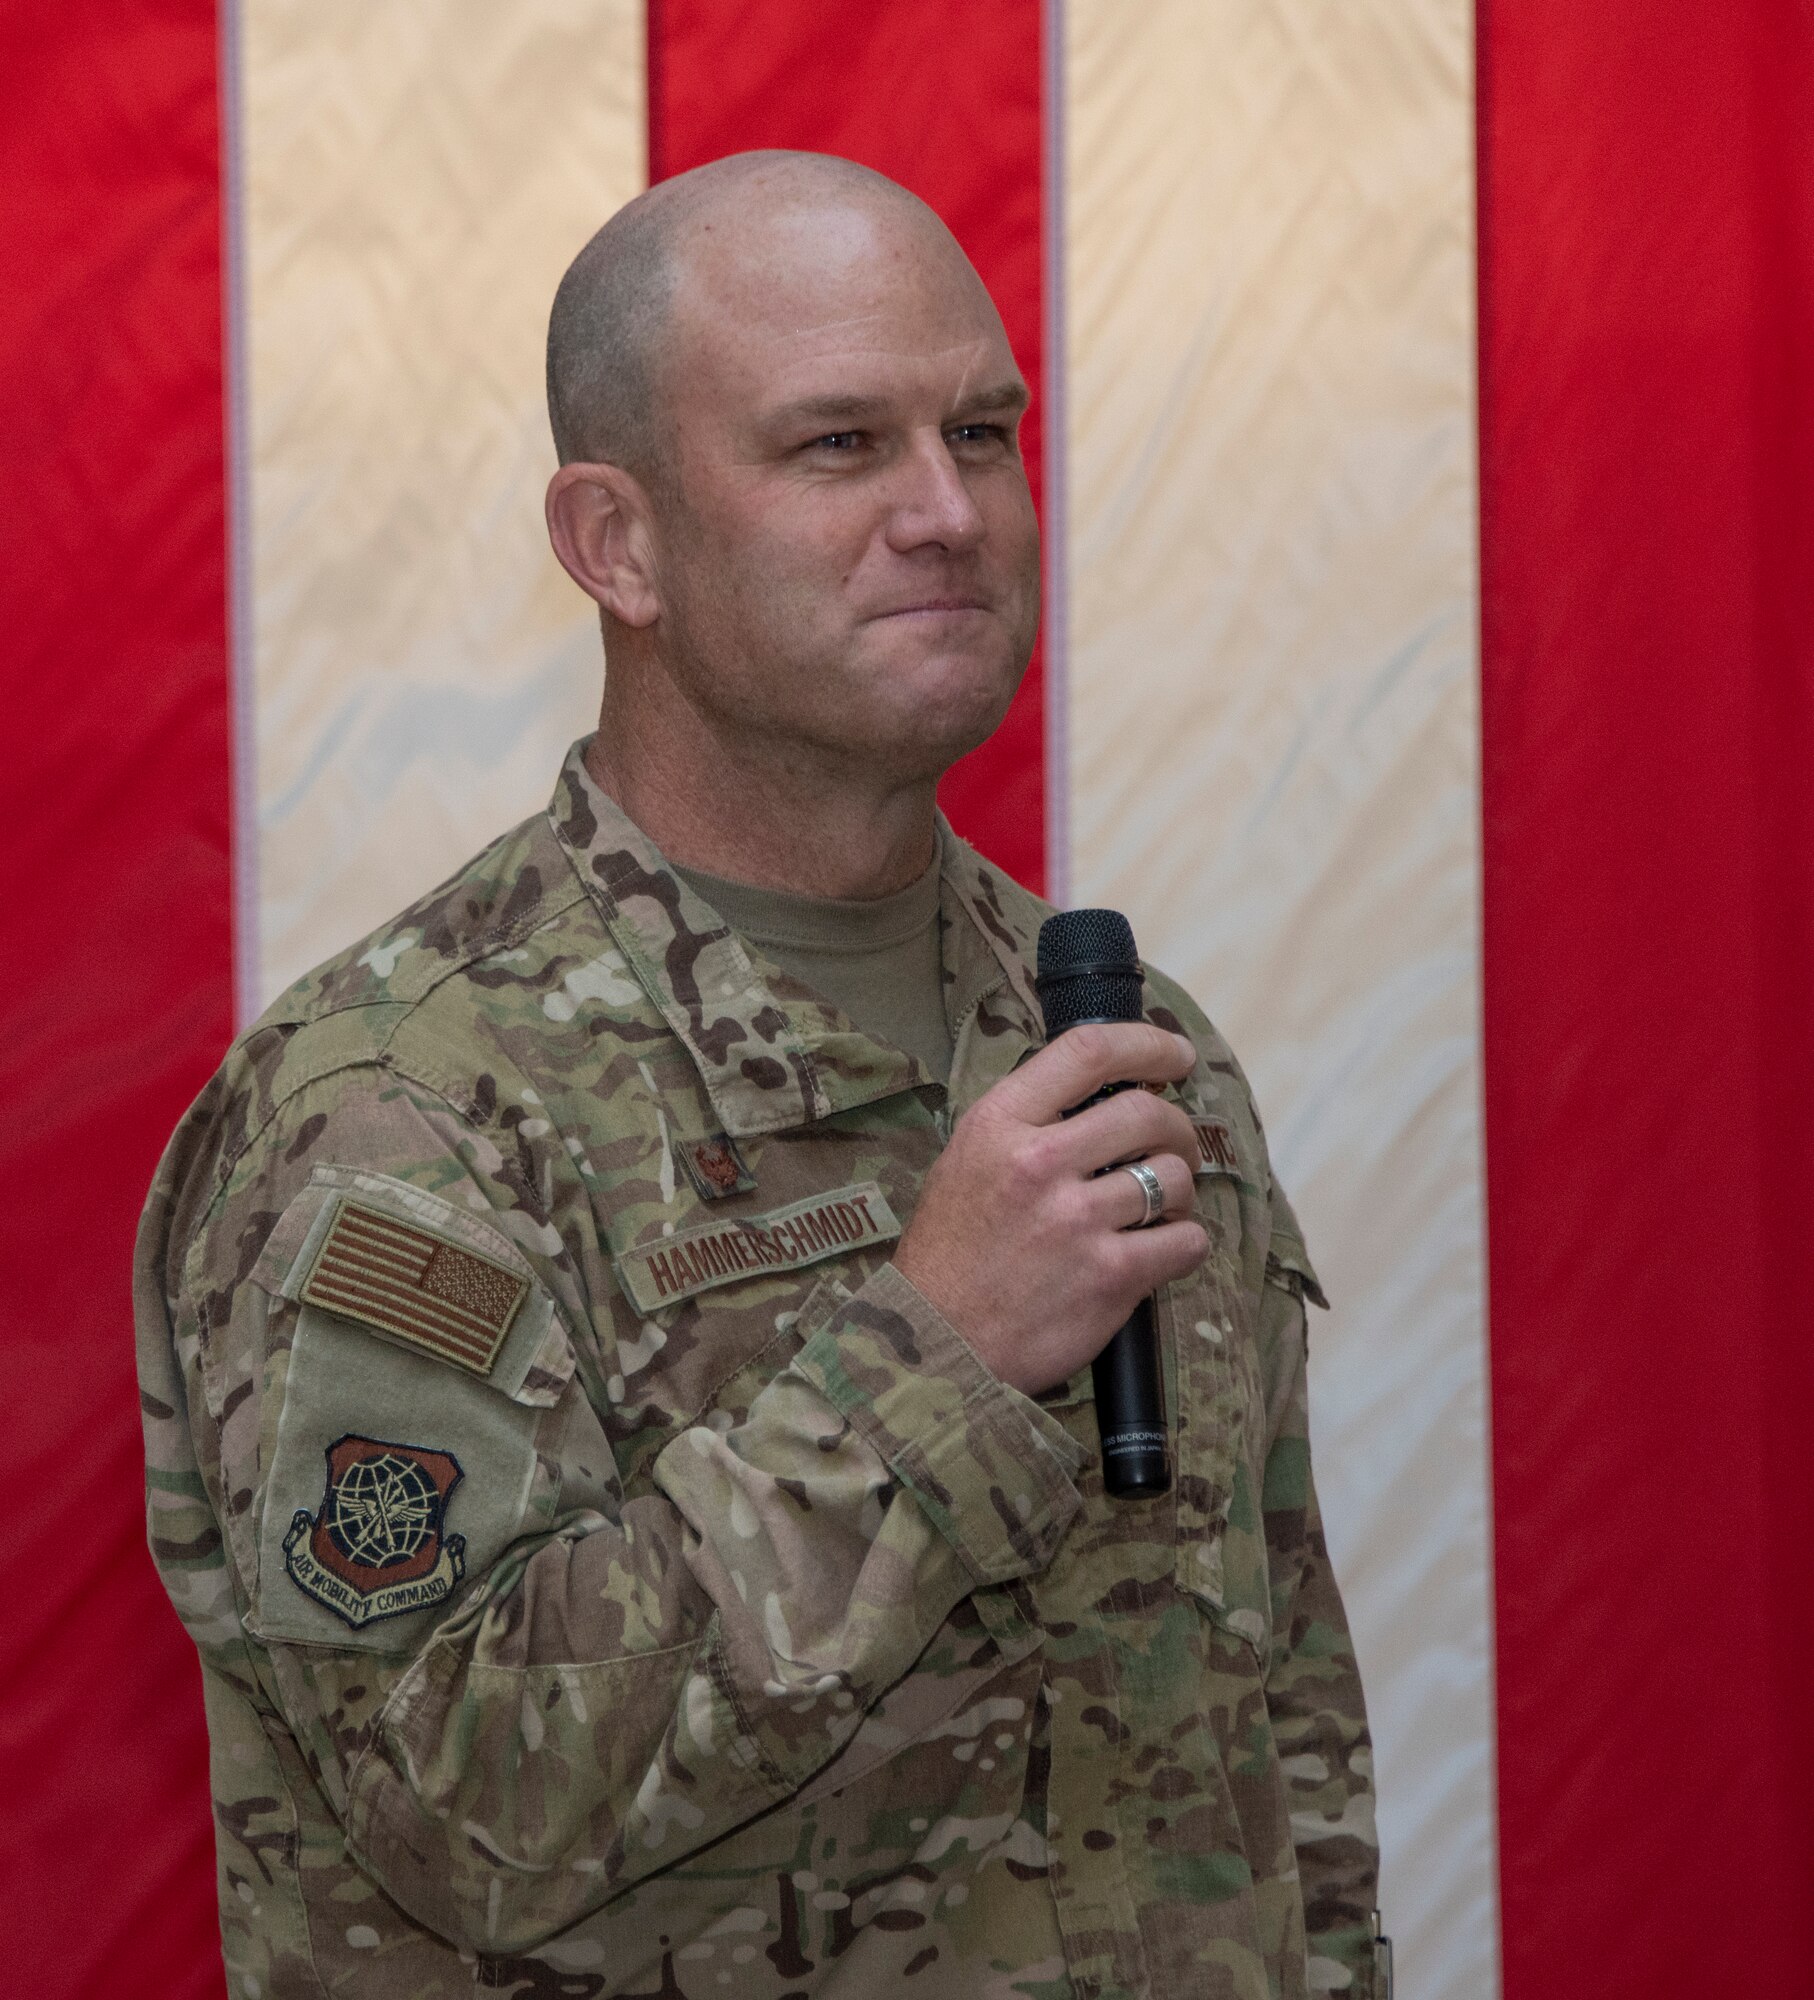 U.S. Air Force Col. David Hammerschmidt, 60th Aircraft Maintenance Group commander, delivers the opening remarks during the Women’s History Month social gathering, March 20, 2019, at Travis Air Force Base, California. Since 1987, the month of March has been designated to celebrate the historical and ongoing achievements and contributions of women. Members of the Women Inspiring the Next Generation’s Success committee were responsible for organizing the event which included an exhibit highlighting extraordinary female heroes and featured speakers prominent in the Travis community. (U.S. Air Force photo by Heide Couch)